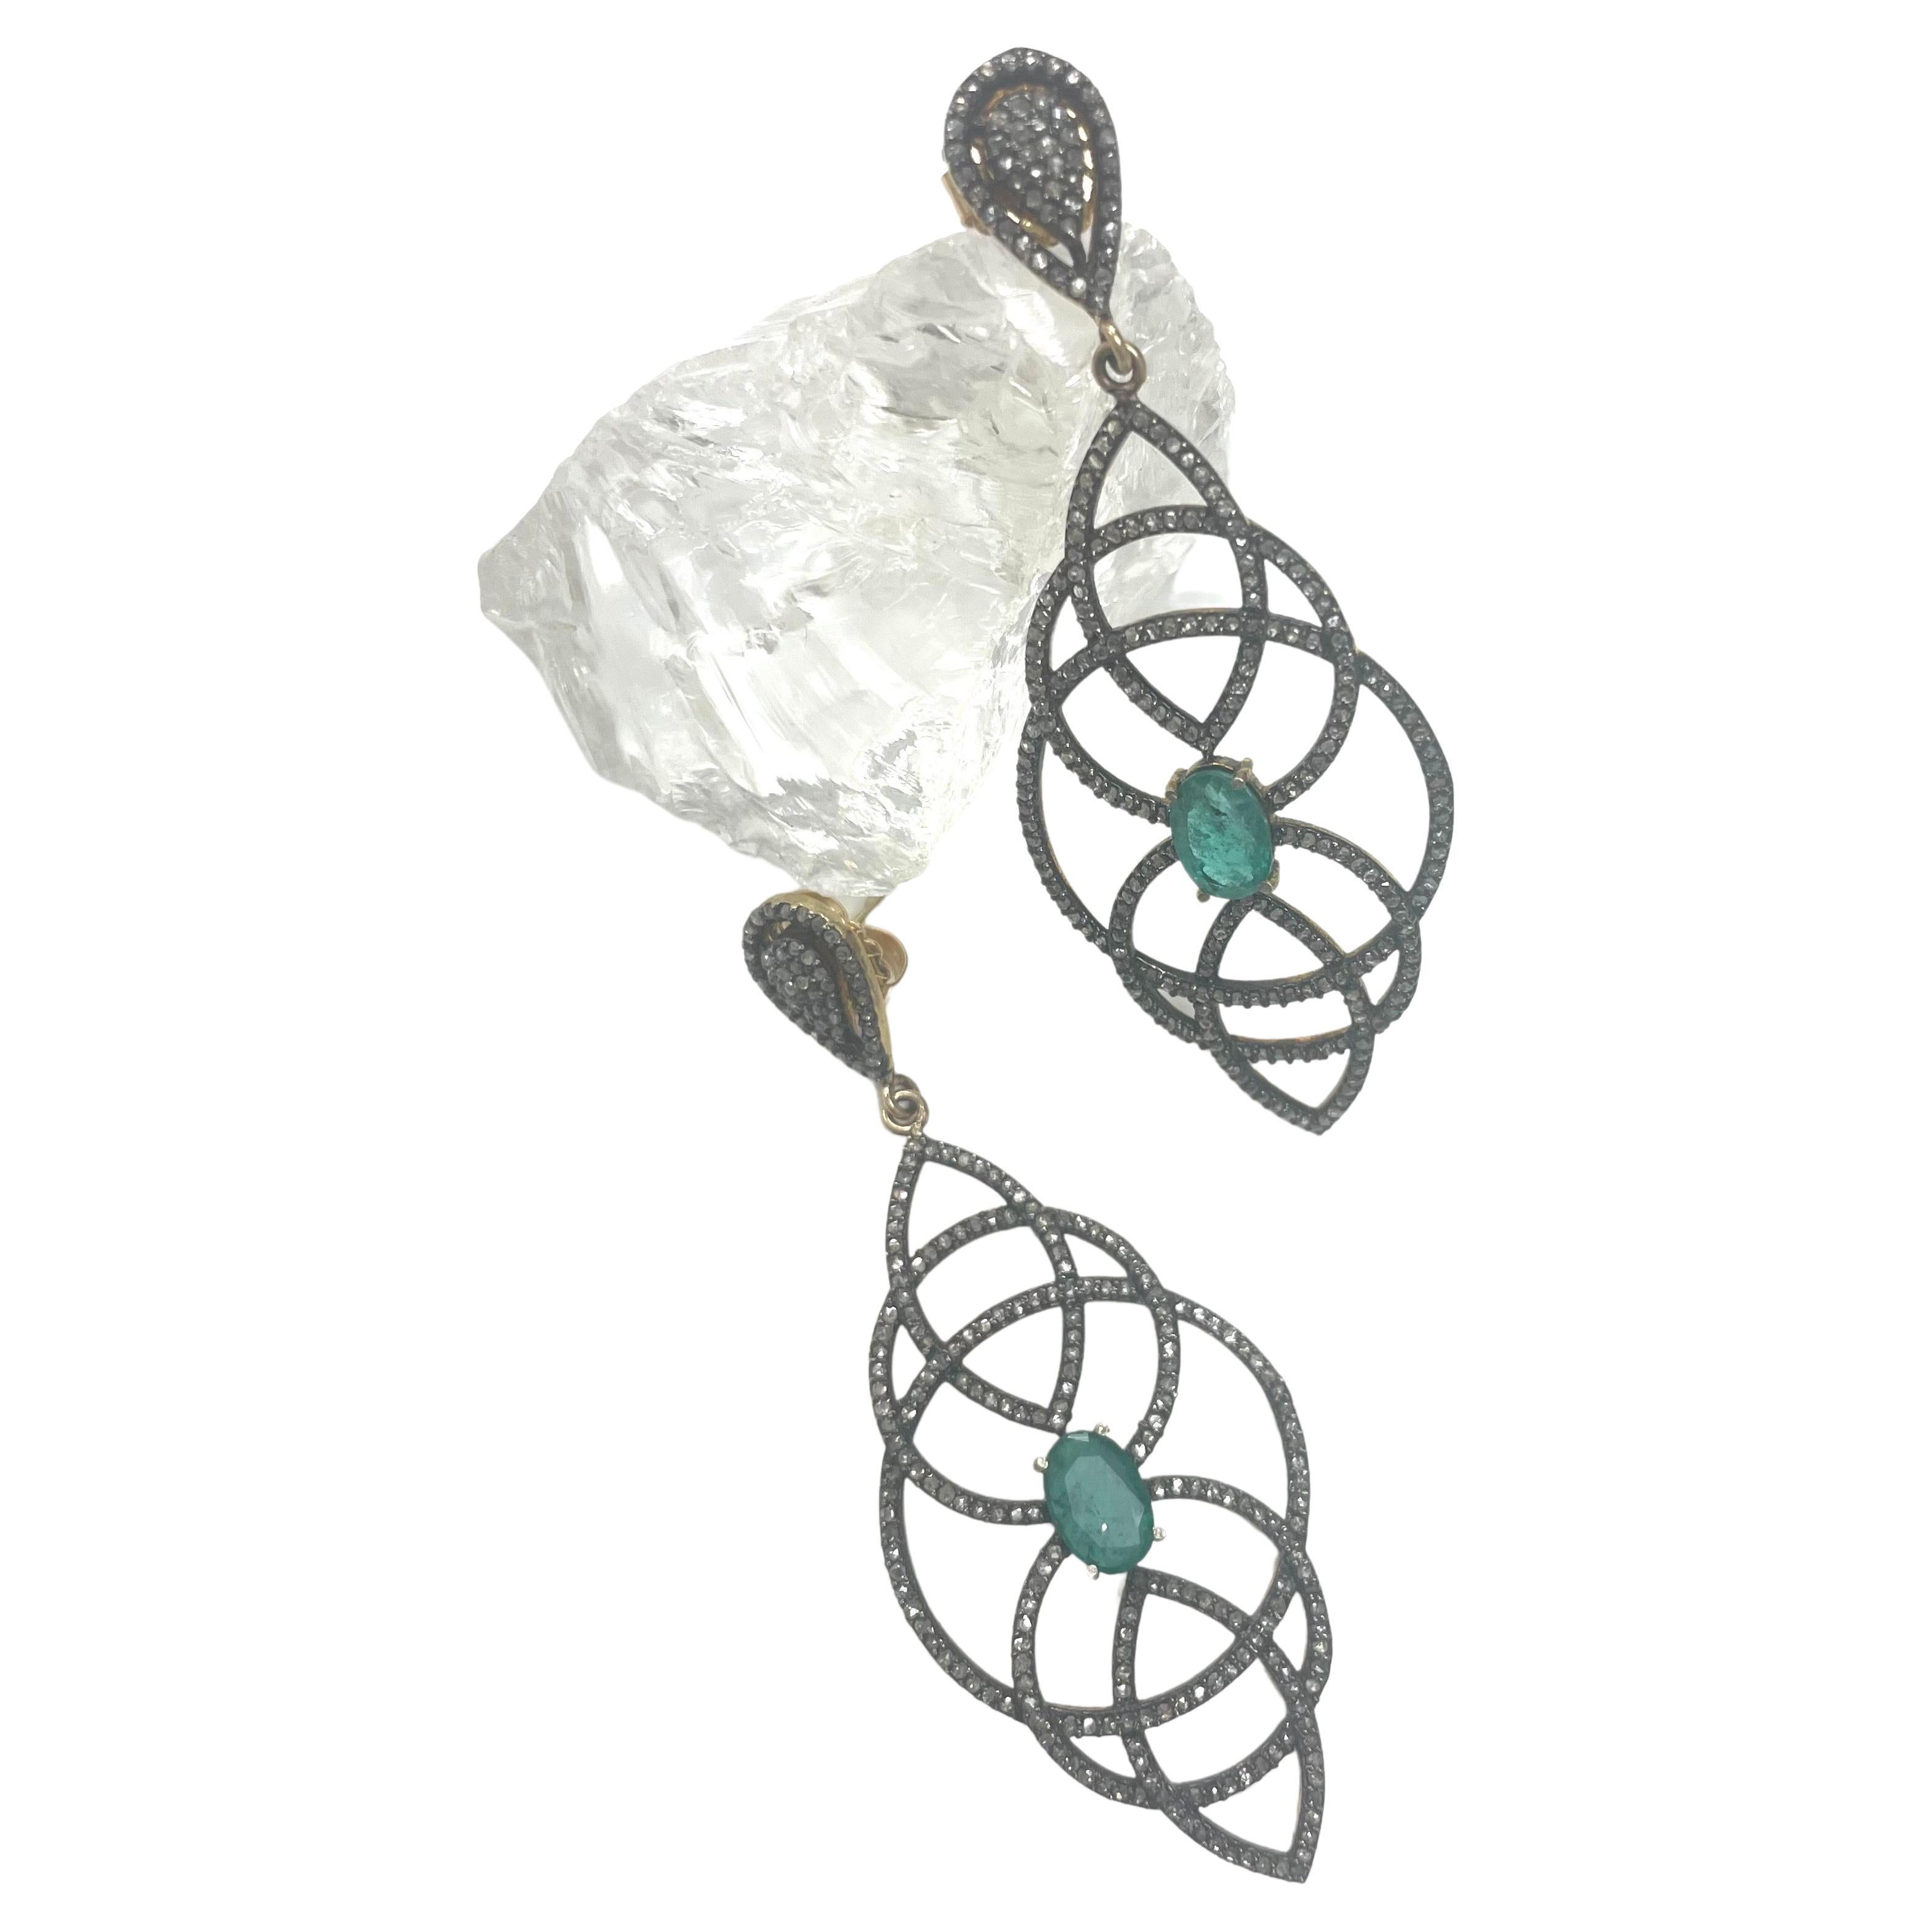 Description
Feminine and fashionable earrings with a stunning, faceted oval emerald centerpiece surrounded by lacy like pave diamonds.
Item #E3166

Materials and Weight
Emeralds, 2.66 carats, 6x9mm, faceted oval cut
Pave diamonds